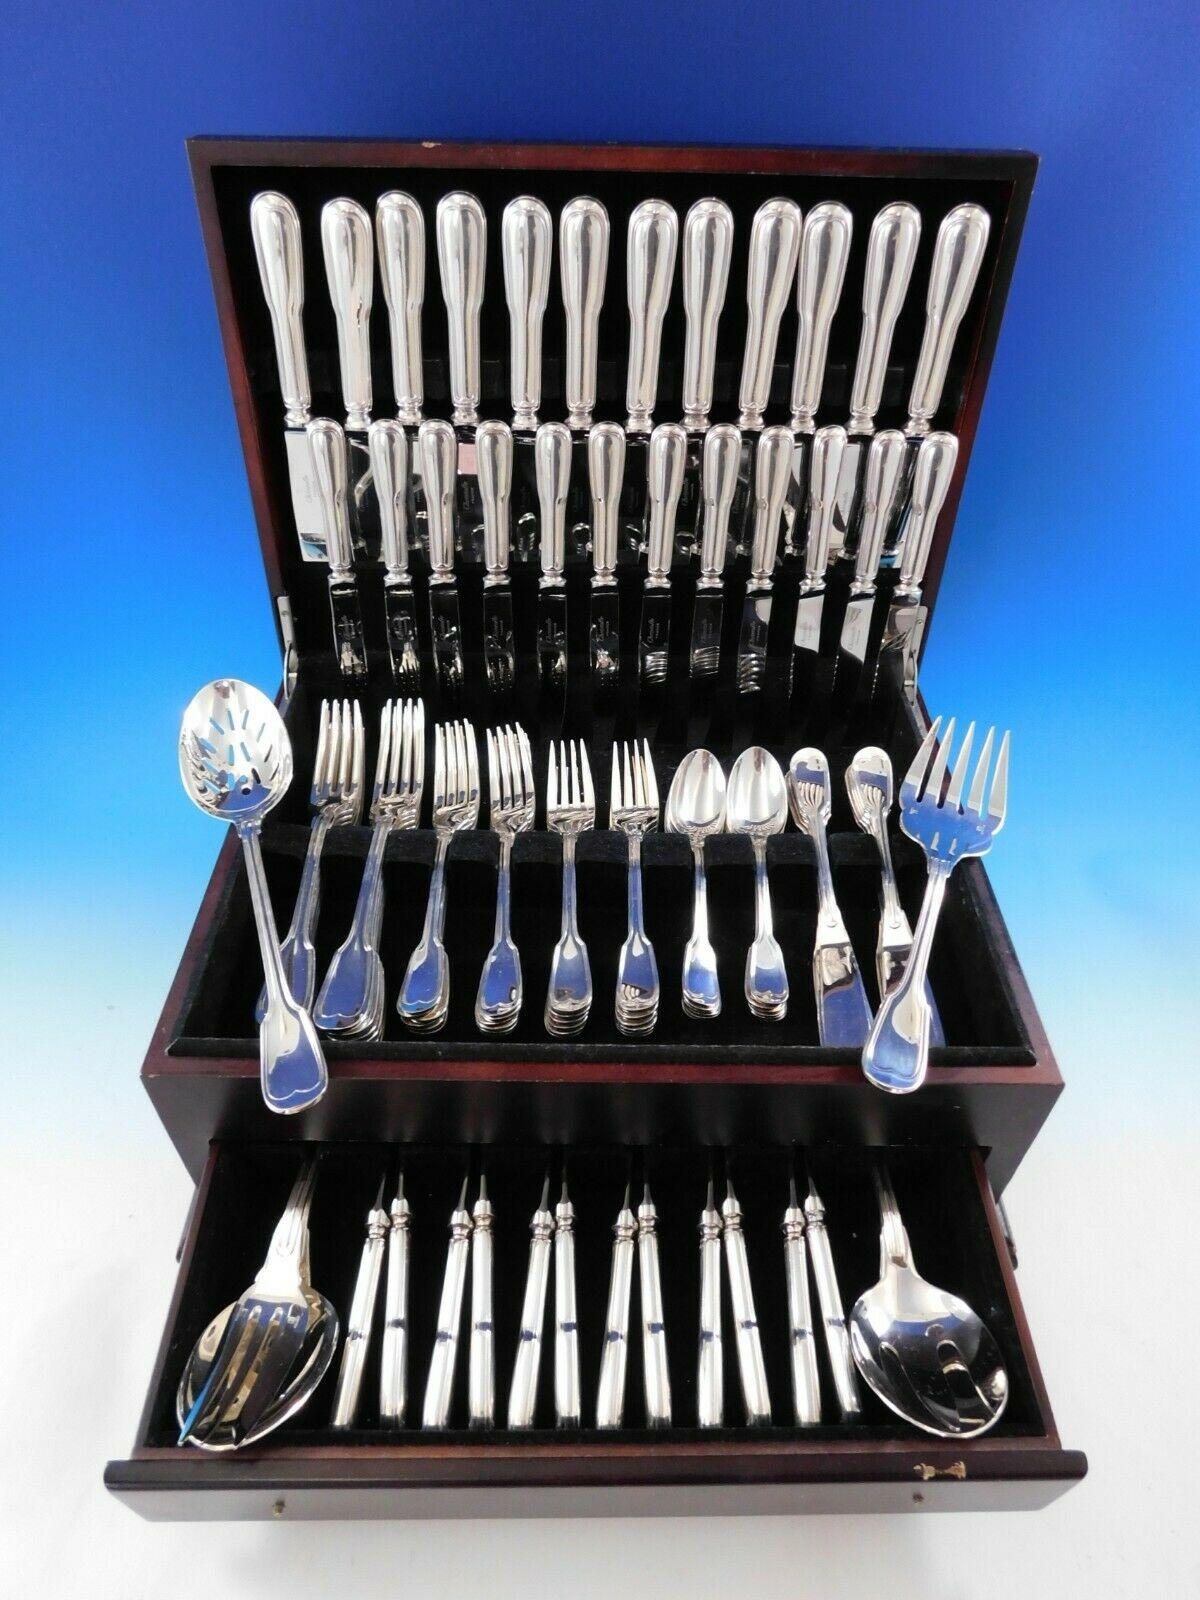 Chinon by Christofle France estate Silverplate flatware set - 102 pieces. This set includes:

12 dinner size knives, 9 7/8